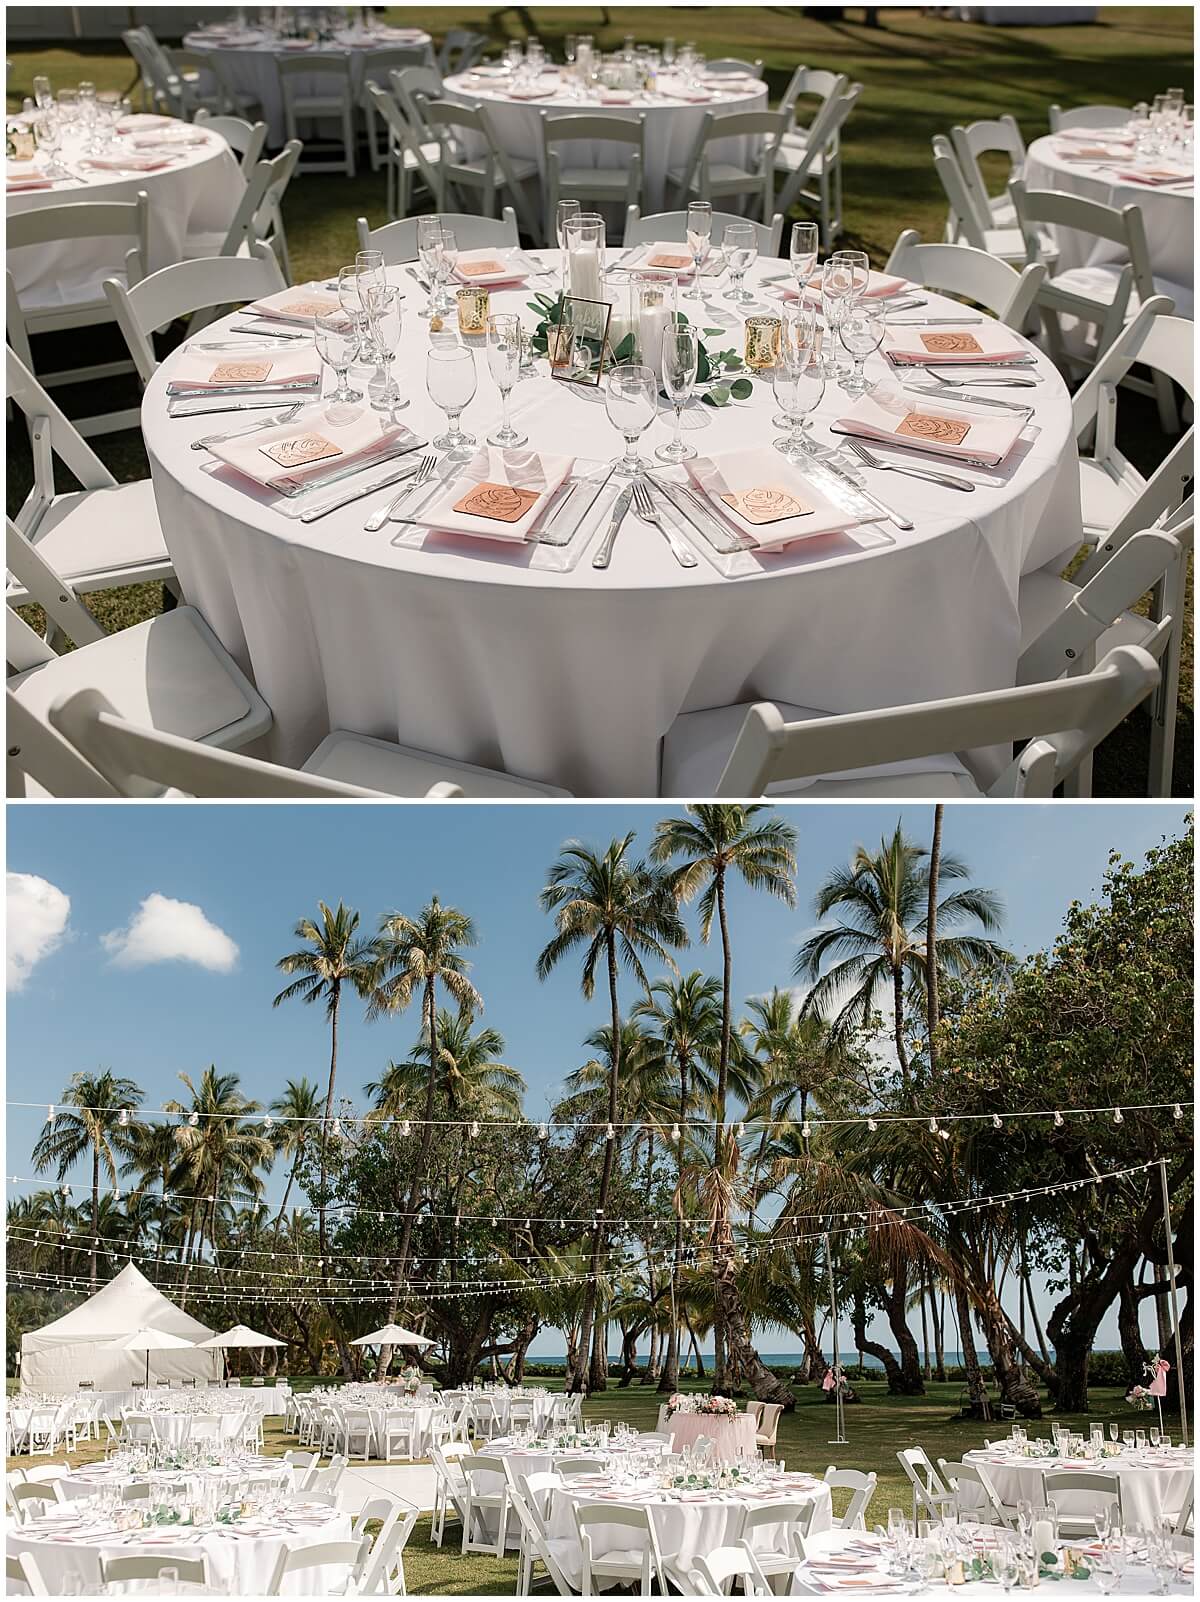 reception table scape with blush pink accent colors and white linens at lanikuhonua four seasons